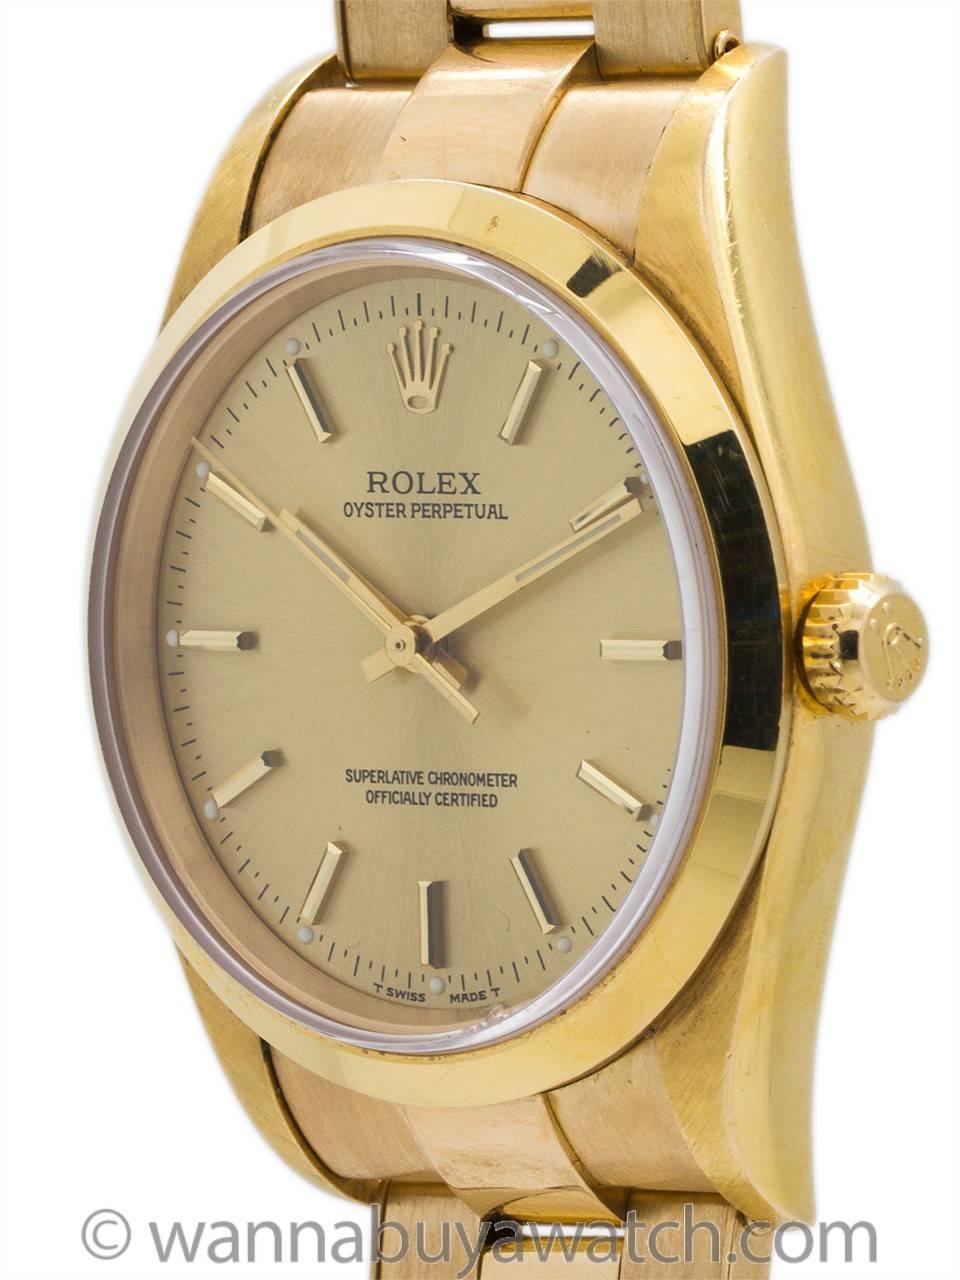 Great looking Rolex Oyster Perpetual 18K gold ref 14208 circa 1997. Featuring 34mm diameter case with smooth bezel and sapphire crystal and original champagne dial with applied gold indexes and gilt baton hands. Powered by self winding calibre 3135